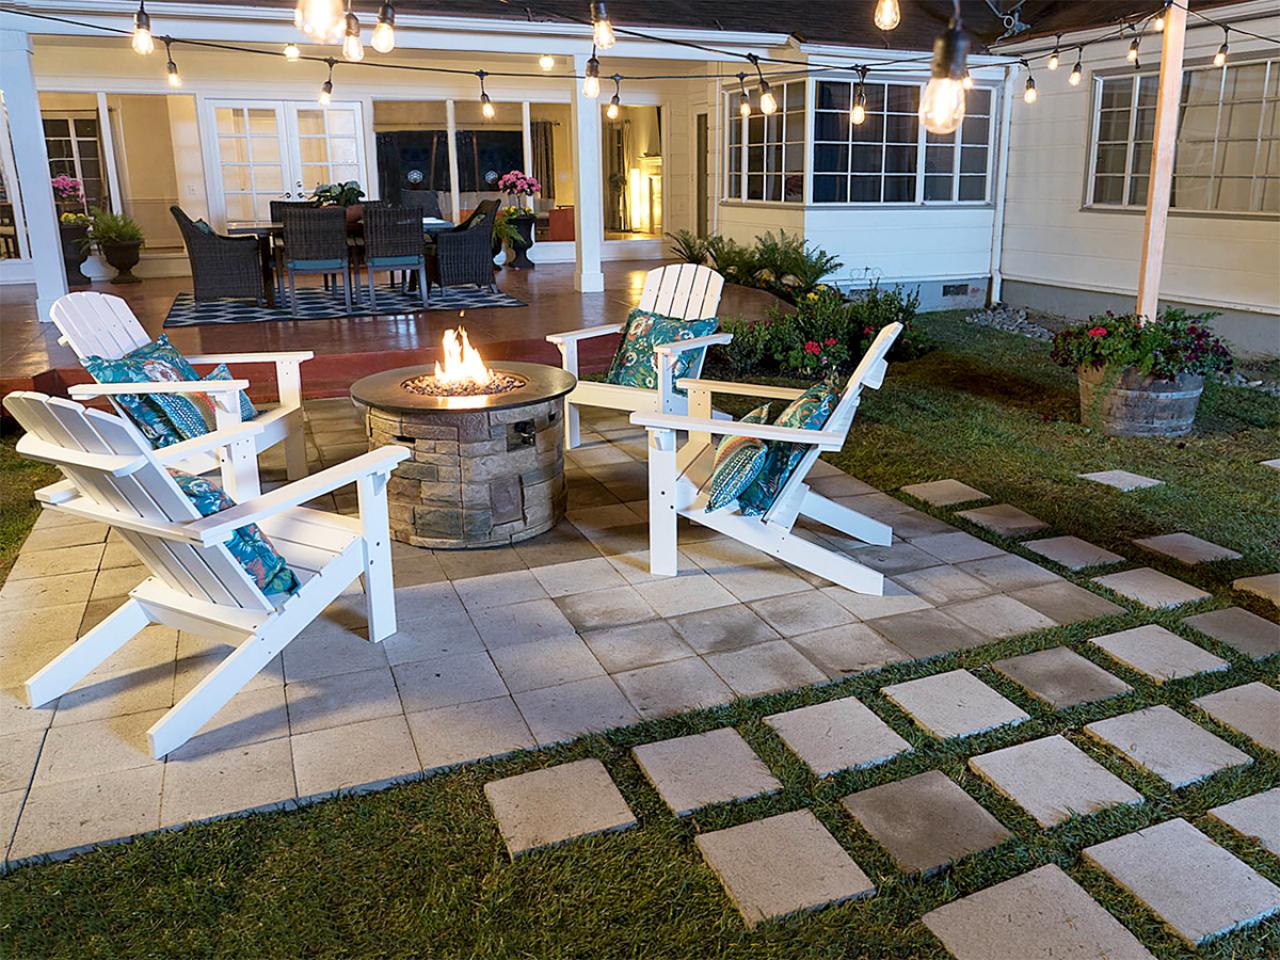 How To Lay A Paver Patio For Firepit, Diy Deck Fire Pit